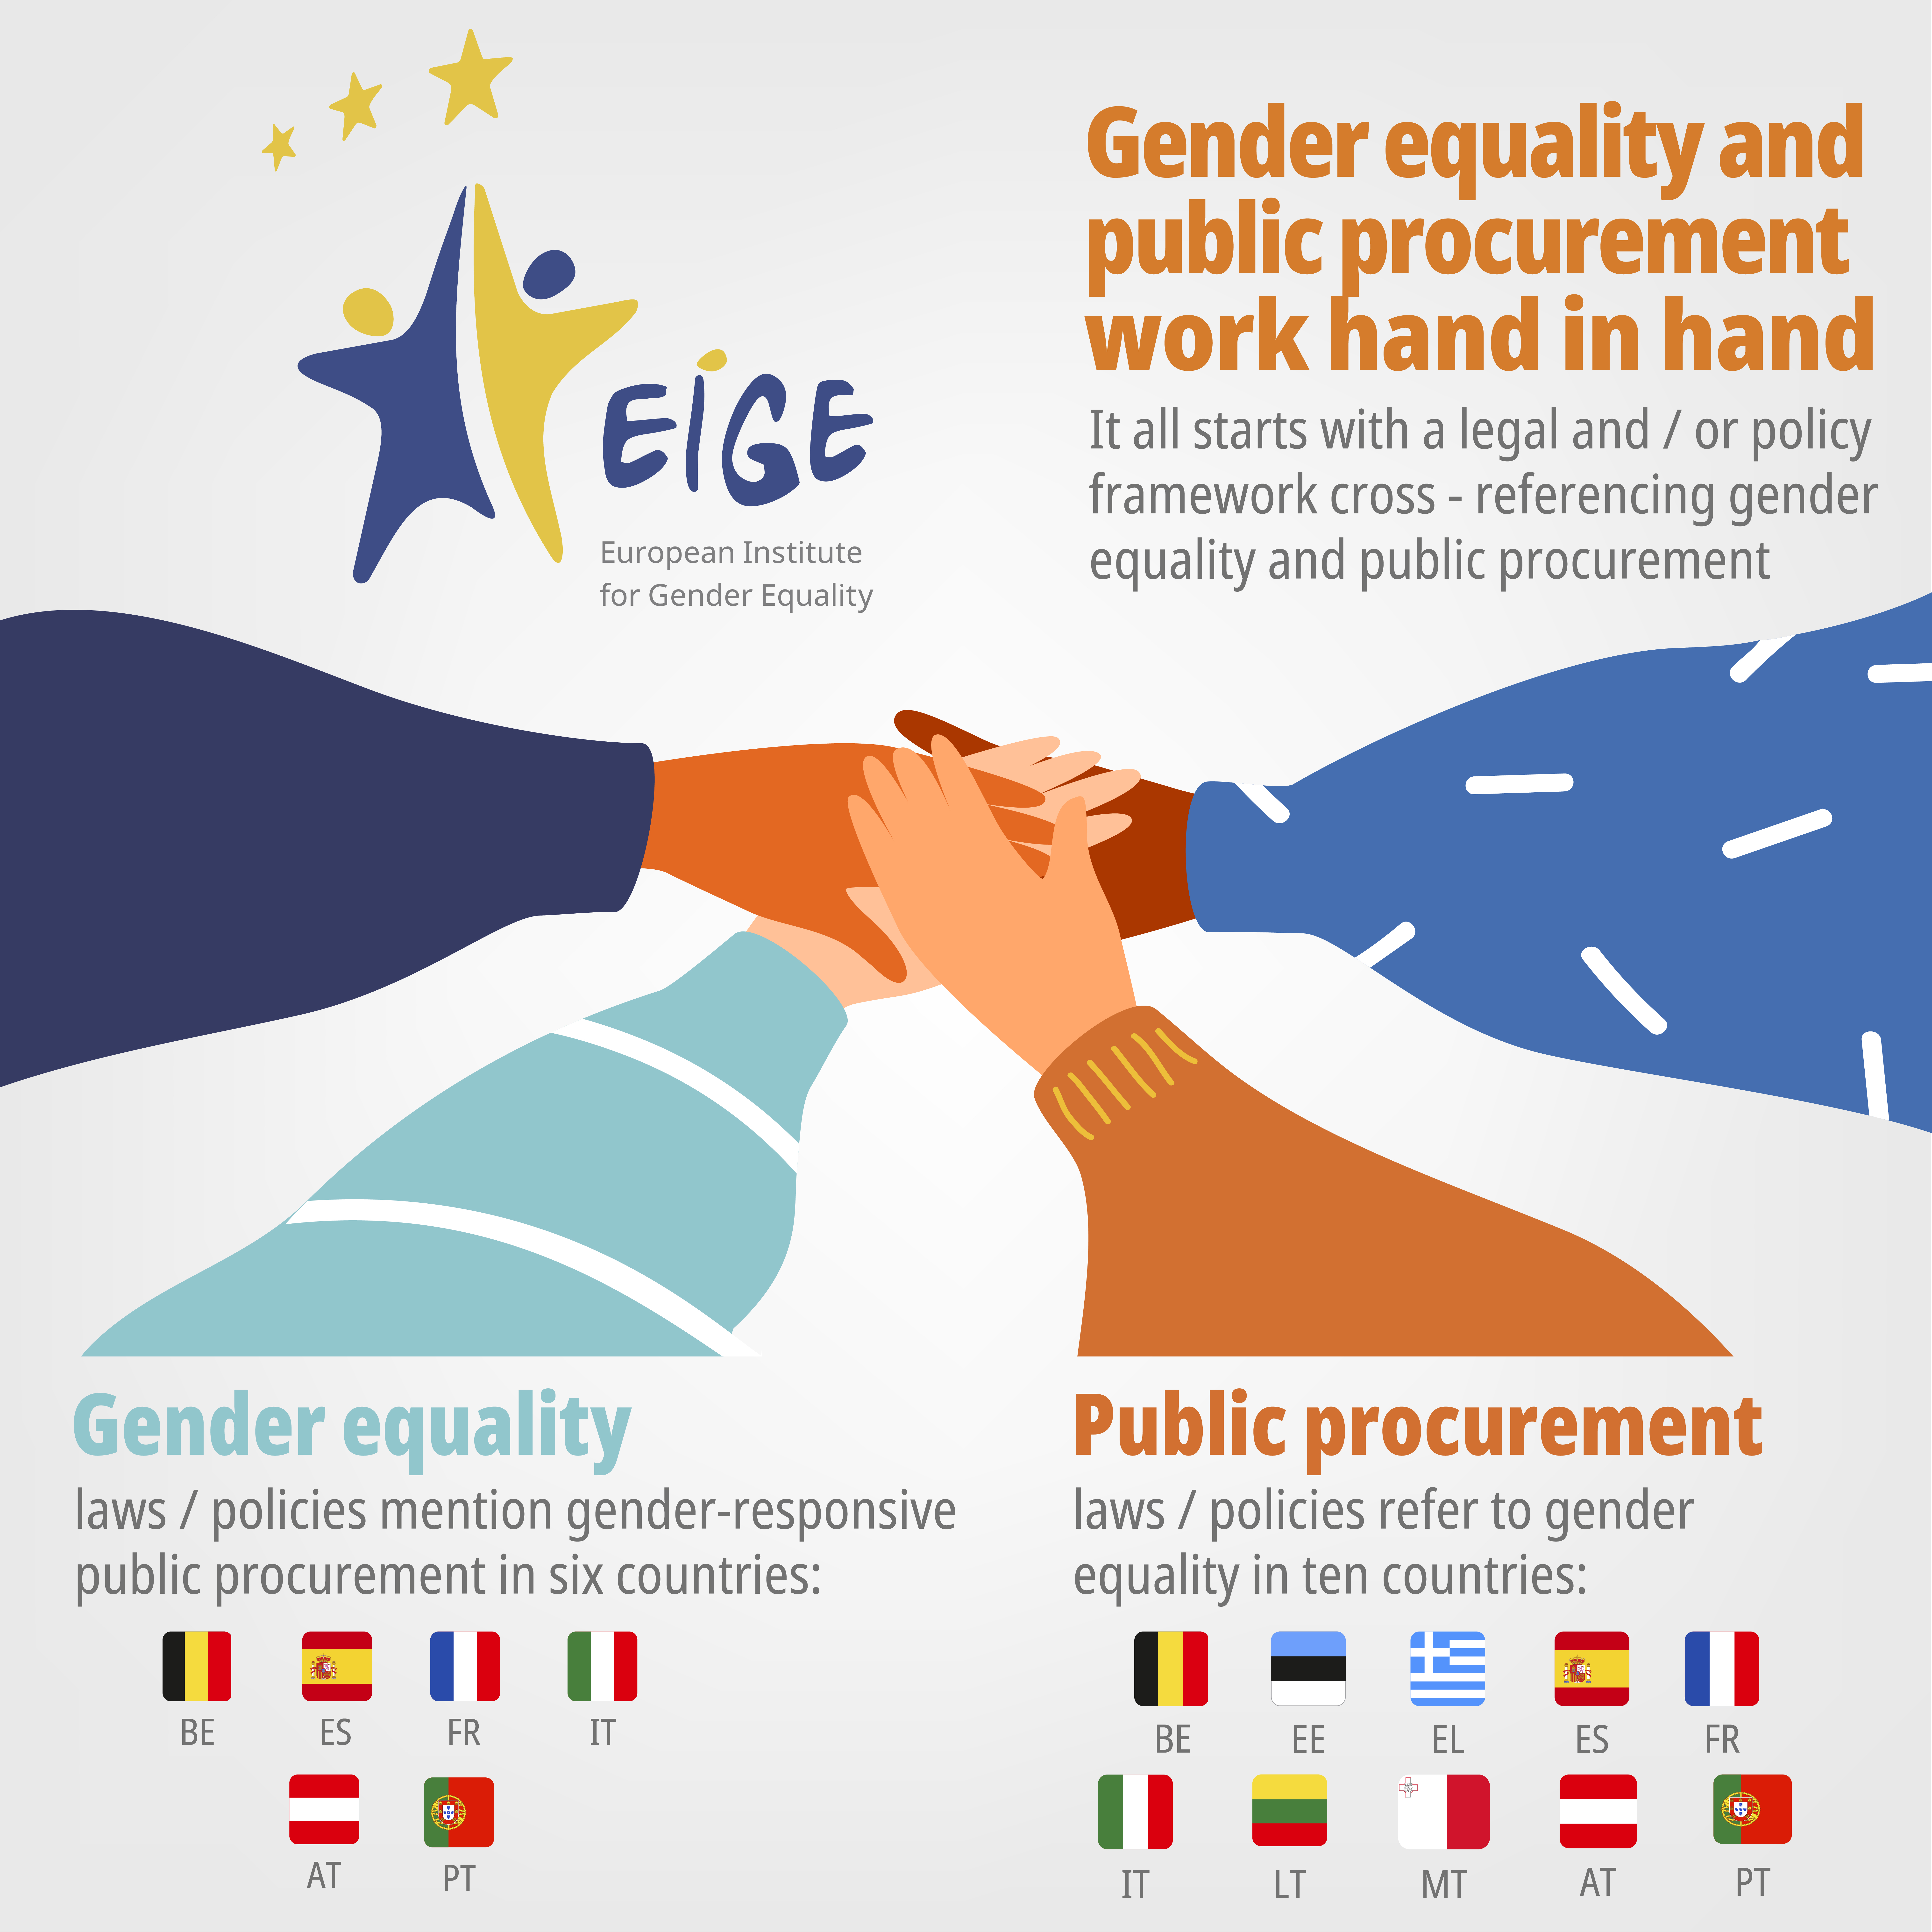 Infographic naming the six EU countries with gender equality laws or policies that mention gender-responsive public procurement (Belgium, Spain, France, Italy, Austria, Portugal) and the ten EU countries with public procurement laws or policies that refer to gender equality (Belgium, Estonia, Greece, Spain, France, Italy, Lithuania, Malta, Austria, Portugal)